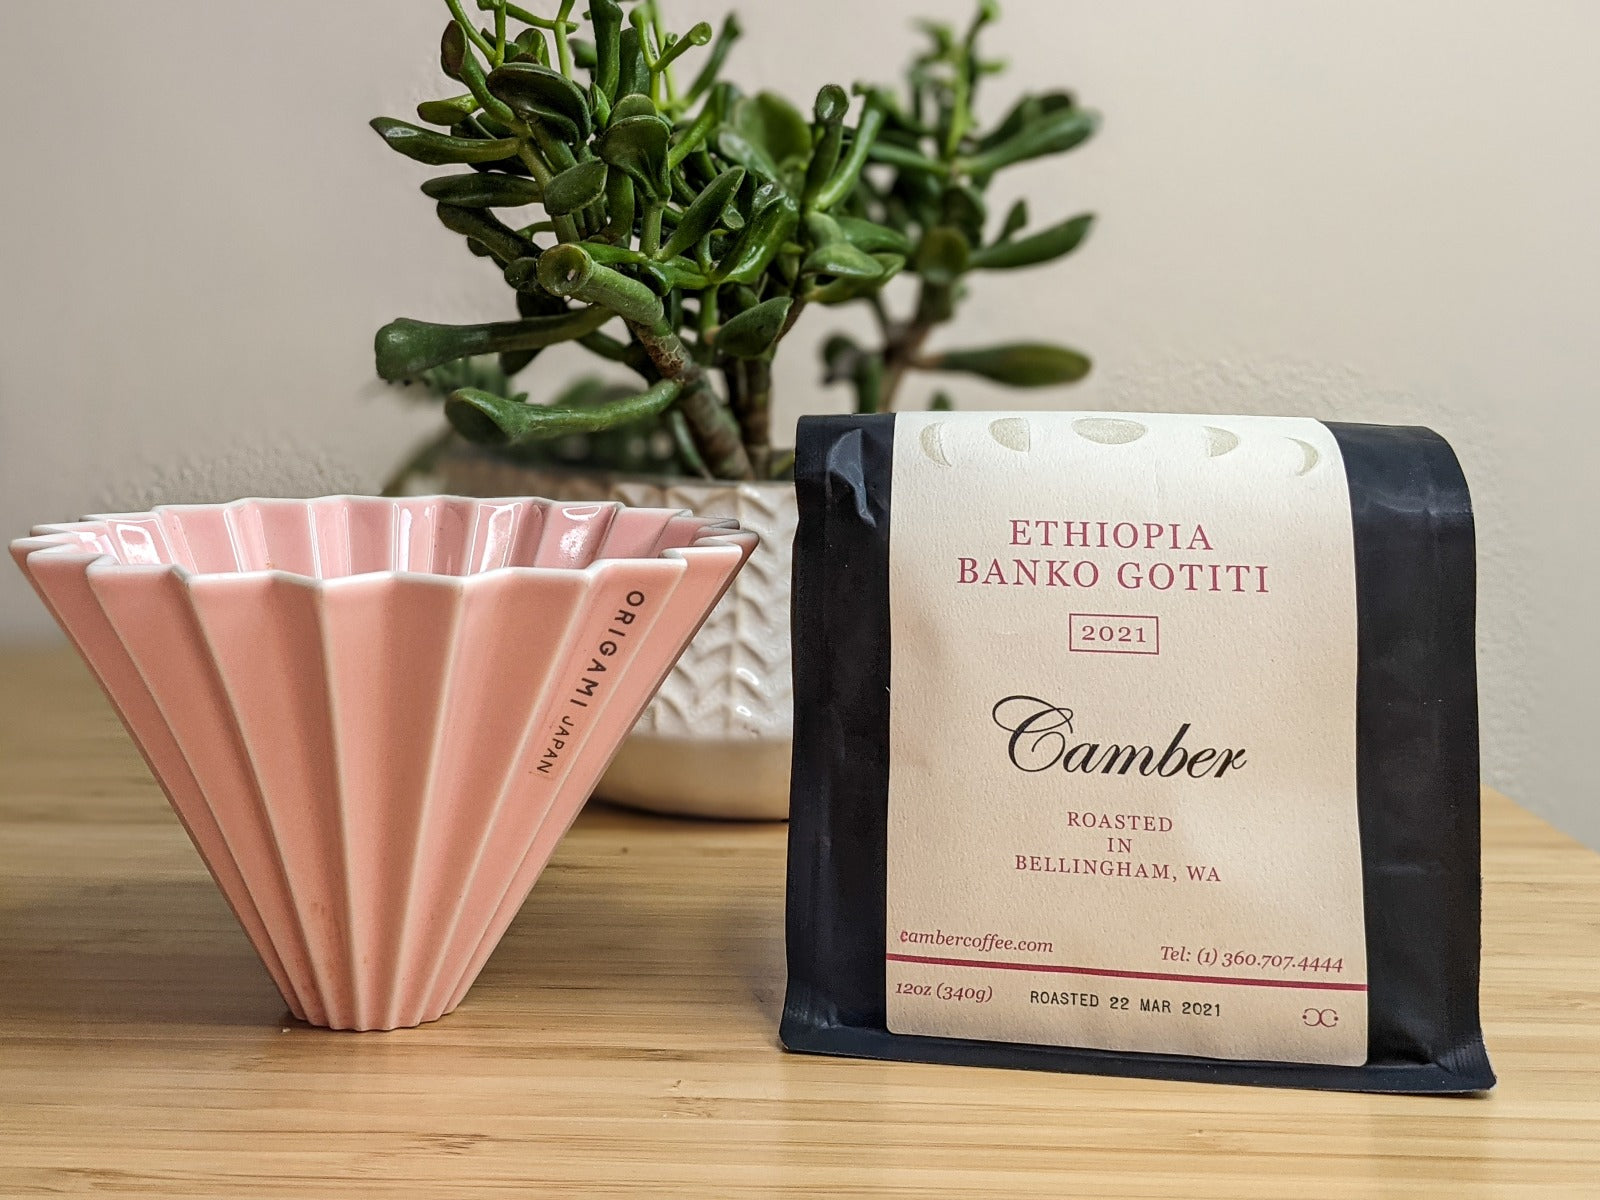 Brewing Ethiopian Bank Gotiti by Camber Coffee with Meghan-Annette